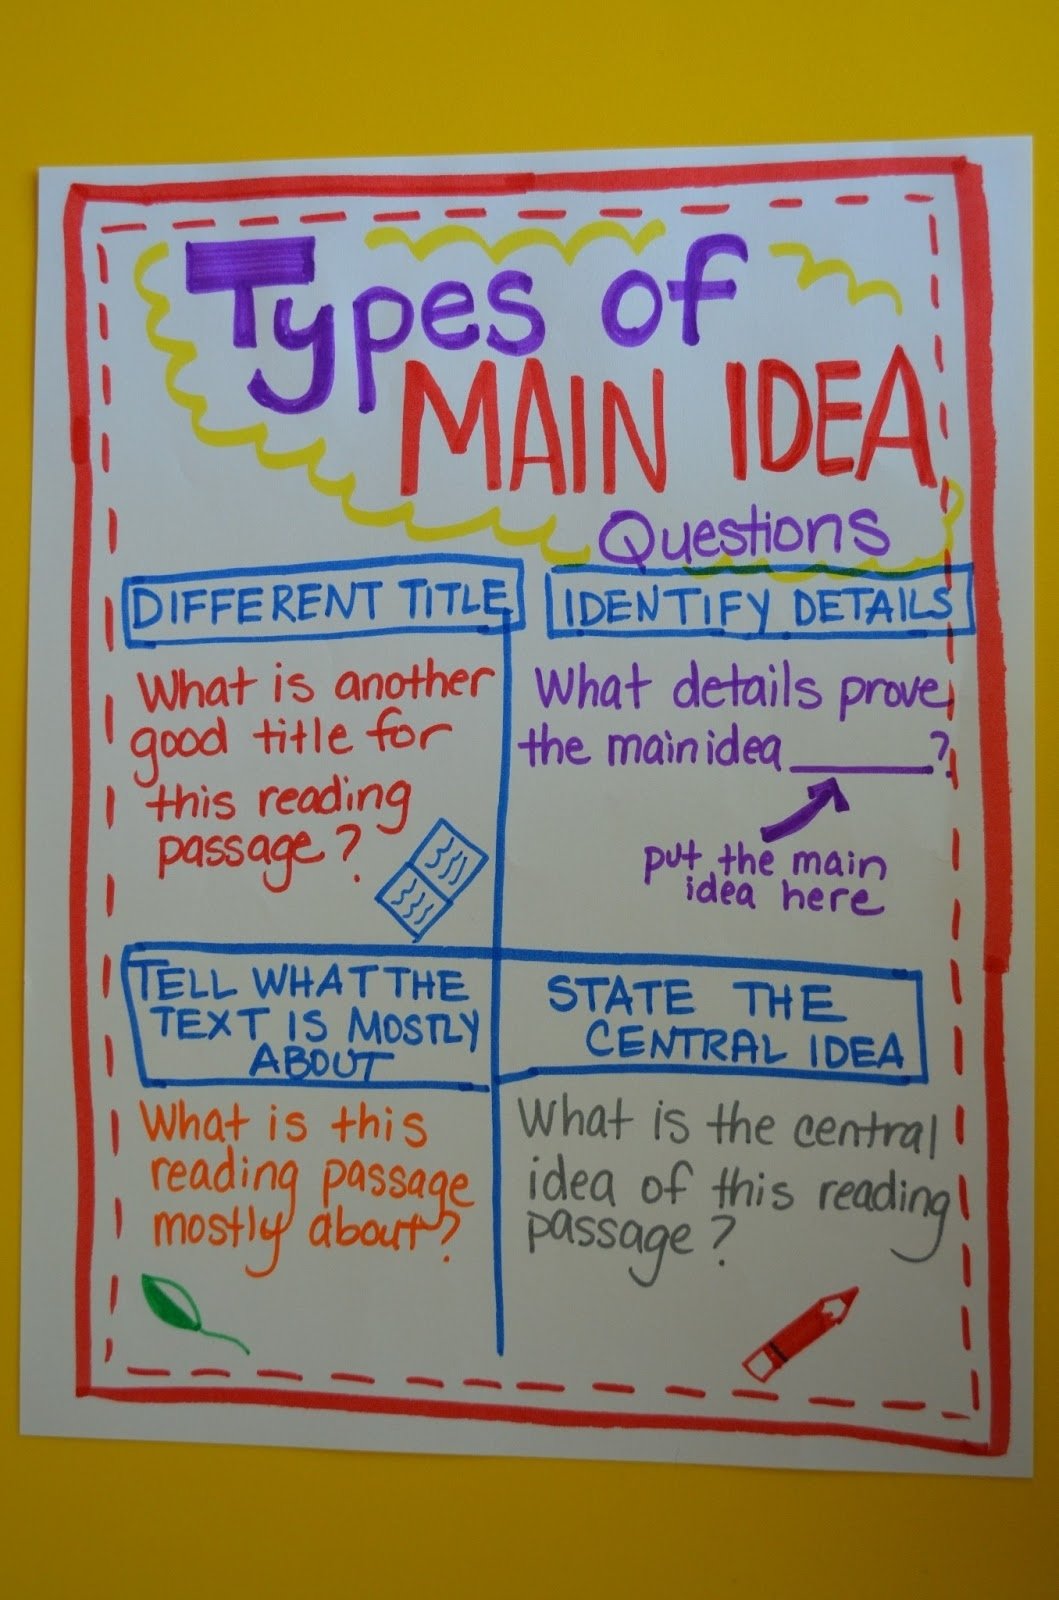 10 Attractive The Definition Of Main Idea literacy math ideas different types of main idea questions 7 2022